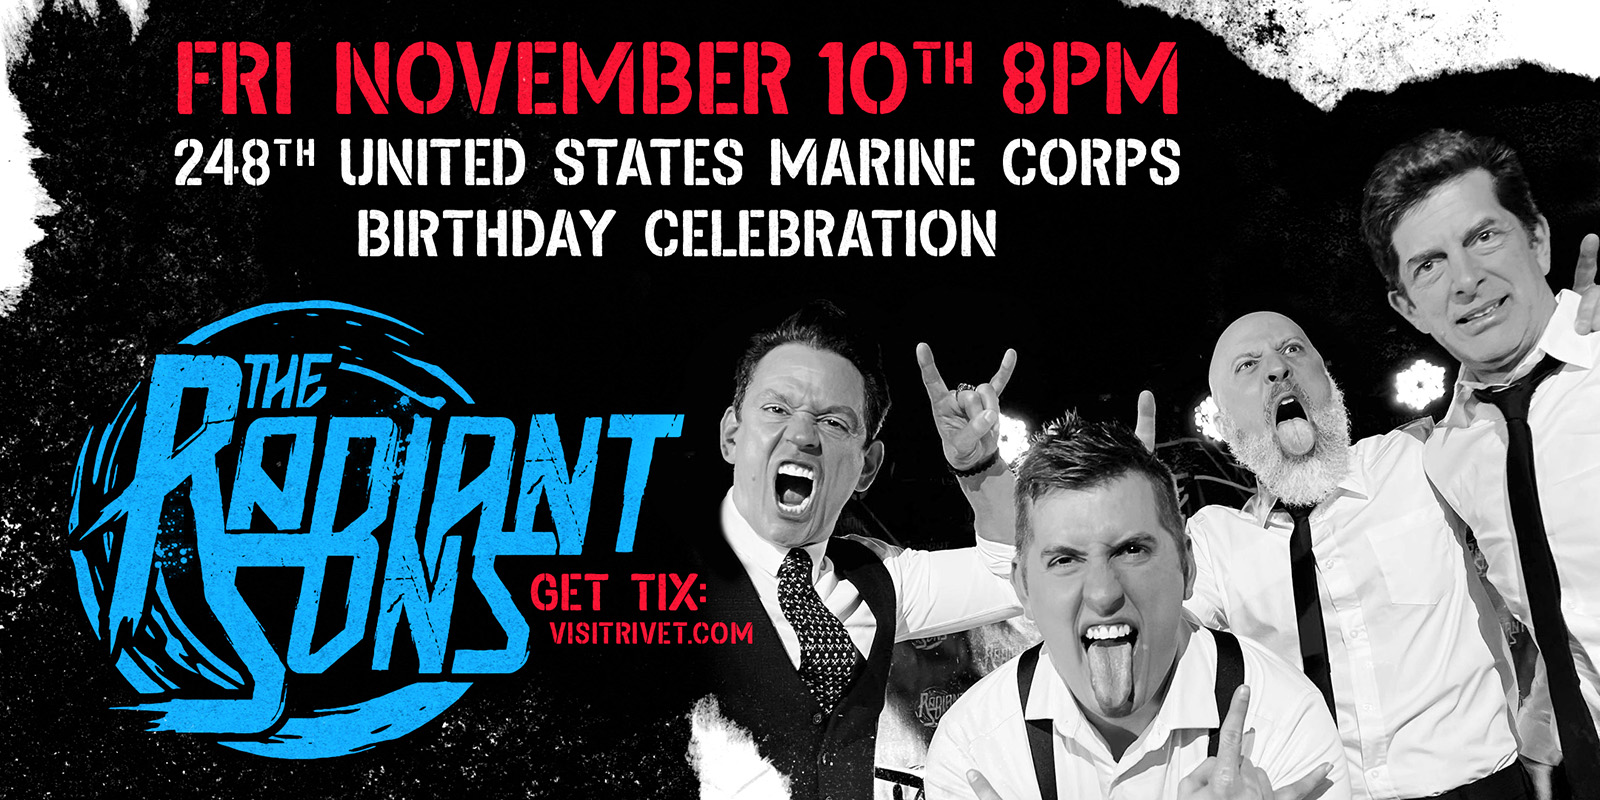 Join us for the 248th United States Marine Corps Birthday Celebration with the awesome rock and roll cover band The Radiant Sons!